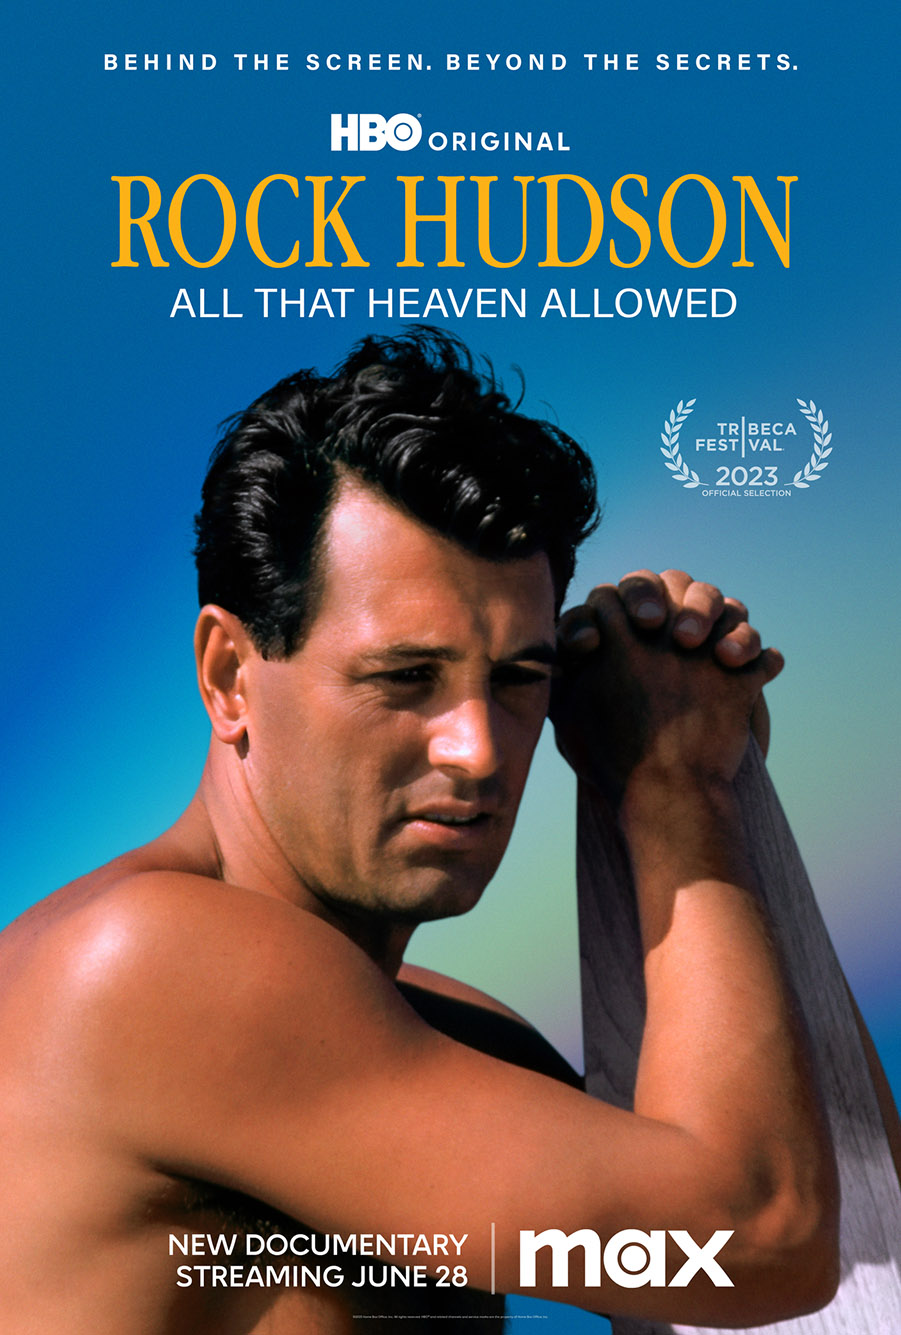 Image: Movie poster for "Rock Hudson- All That Heaven Allowed". Poster shows Hudson topless as he rests at the side of a pool. Title of documentary is shown in burnt yellow as on a blue background.